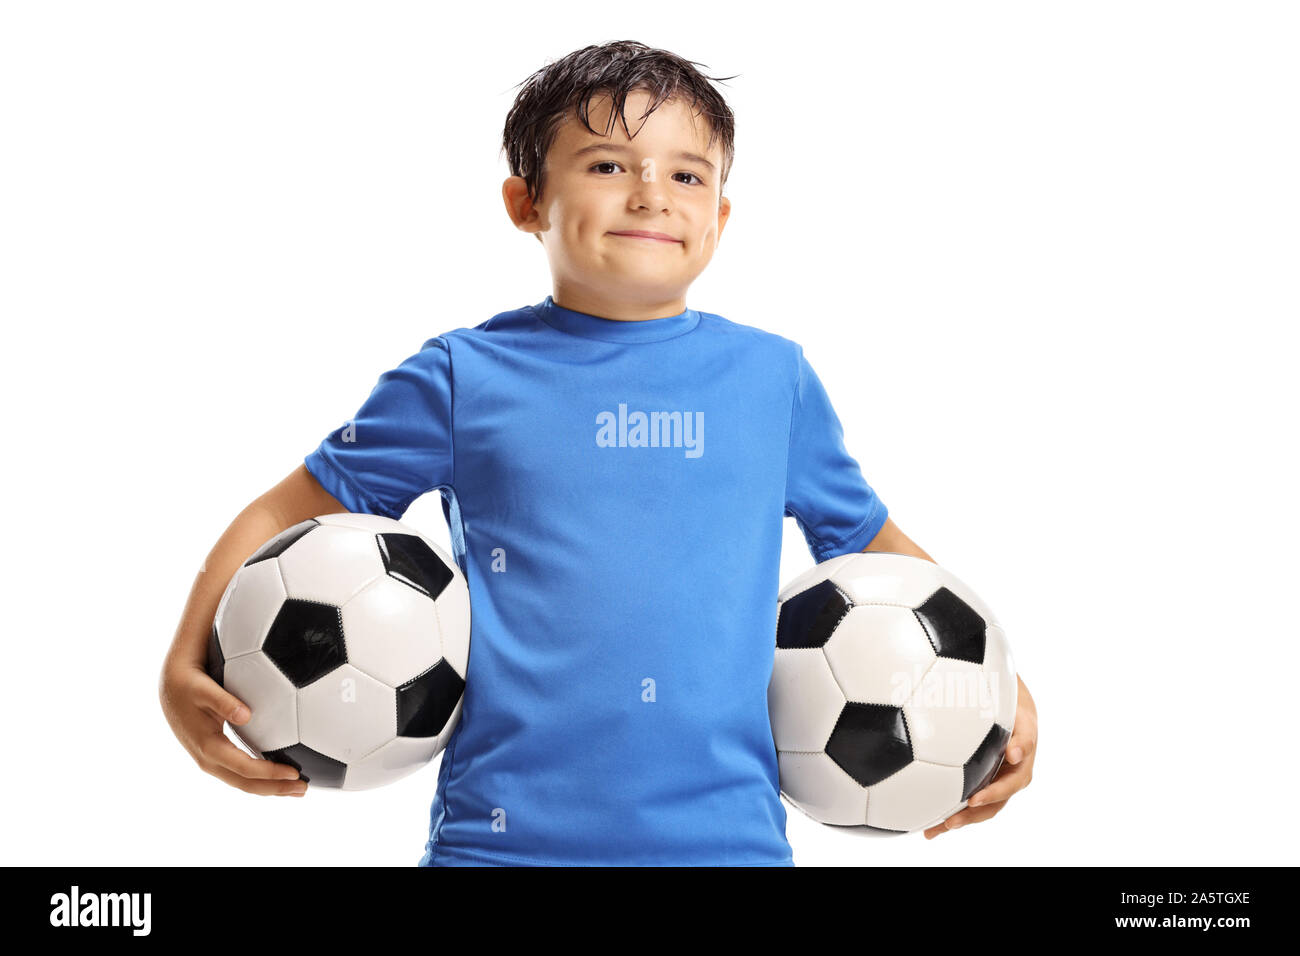 Boy holding two soccer balls isolated on white background Stock Photo